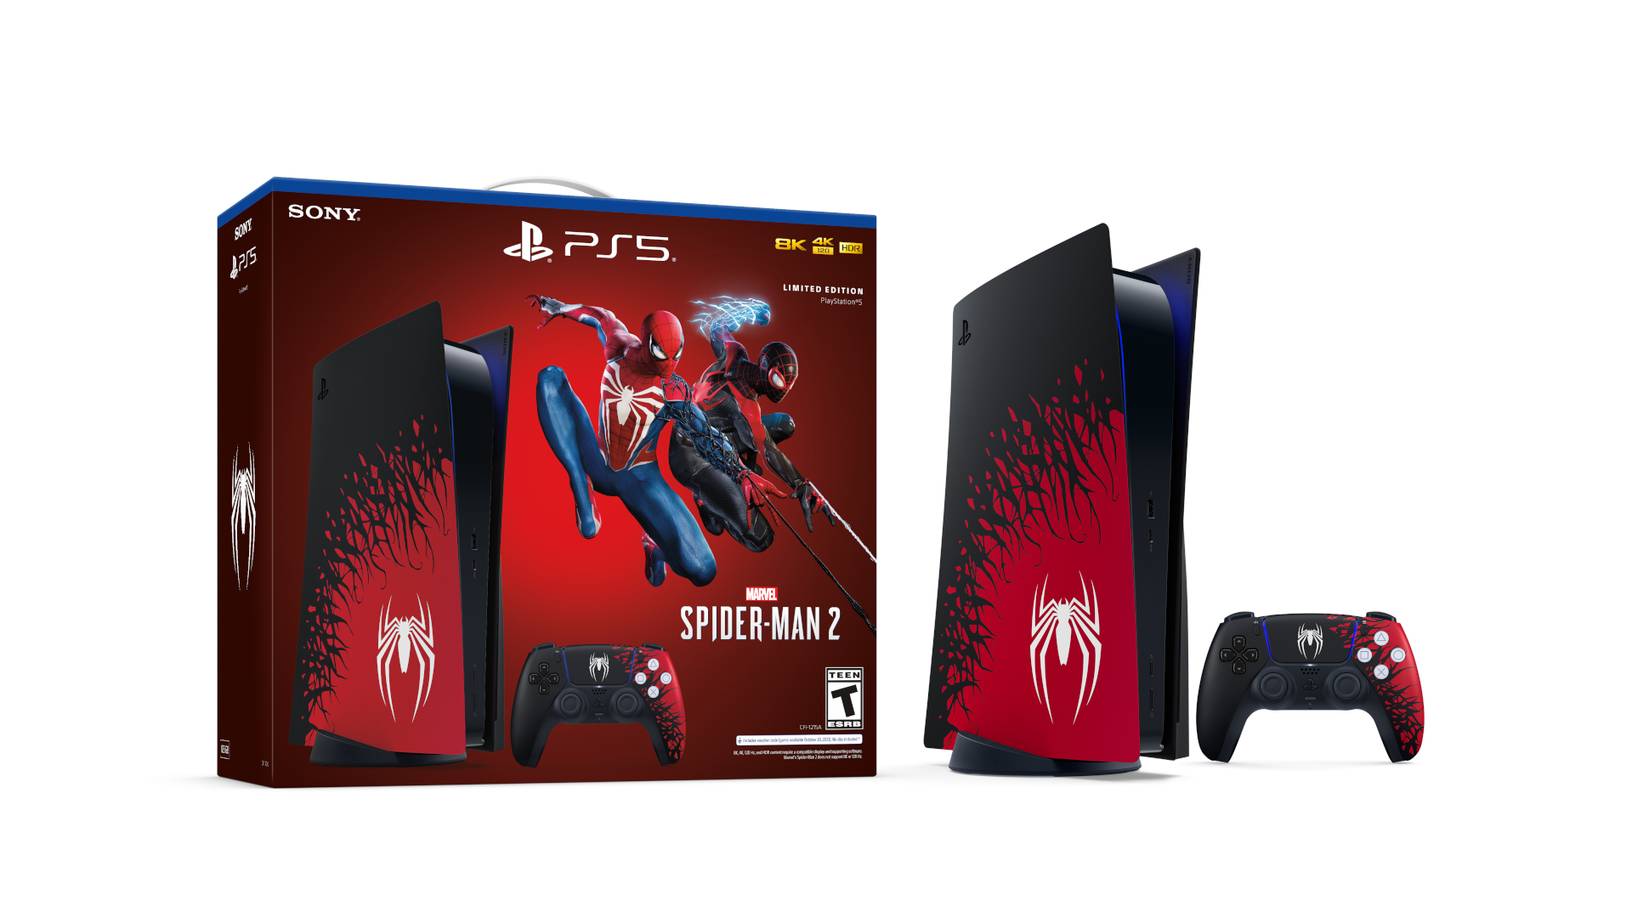 Premier look: Console PS5 - Marvel’s Spider-Man 2 Limited Edition Bundle